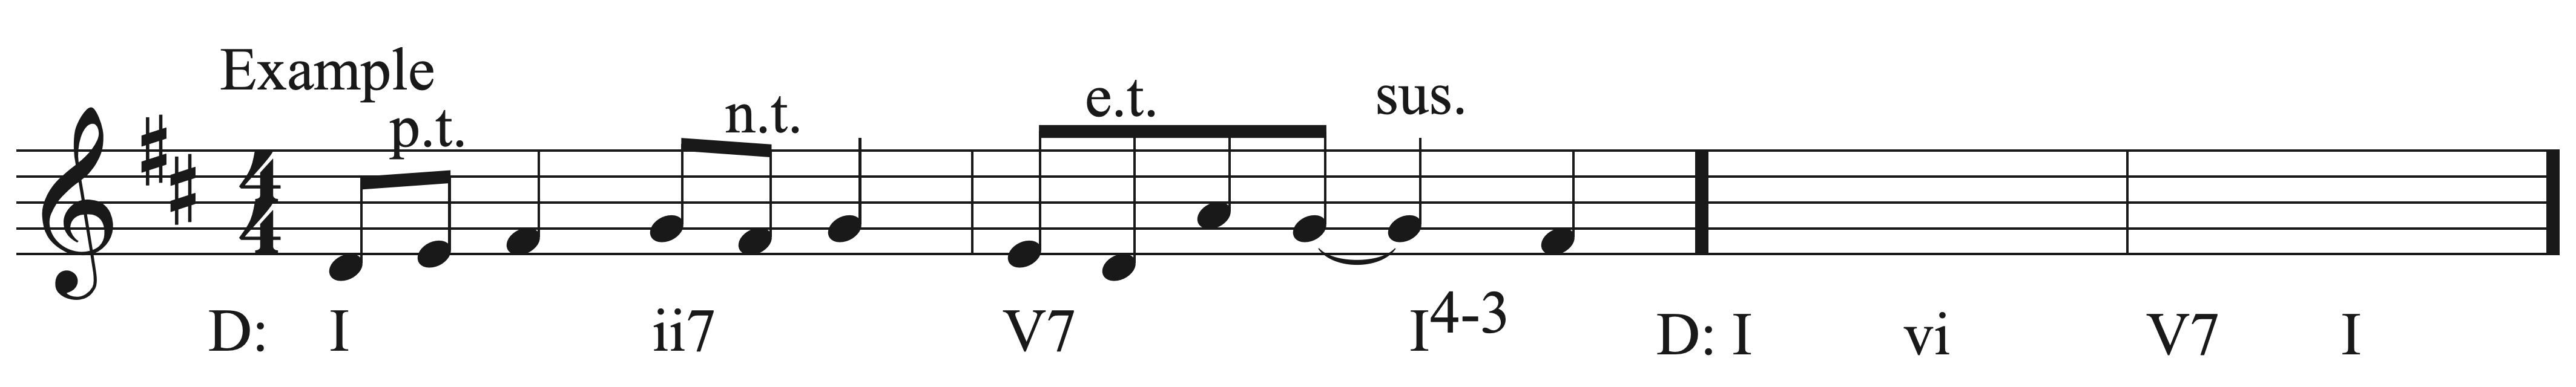 Part Writing Non-Chord Tones Sight Singing exercise example